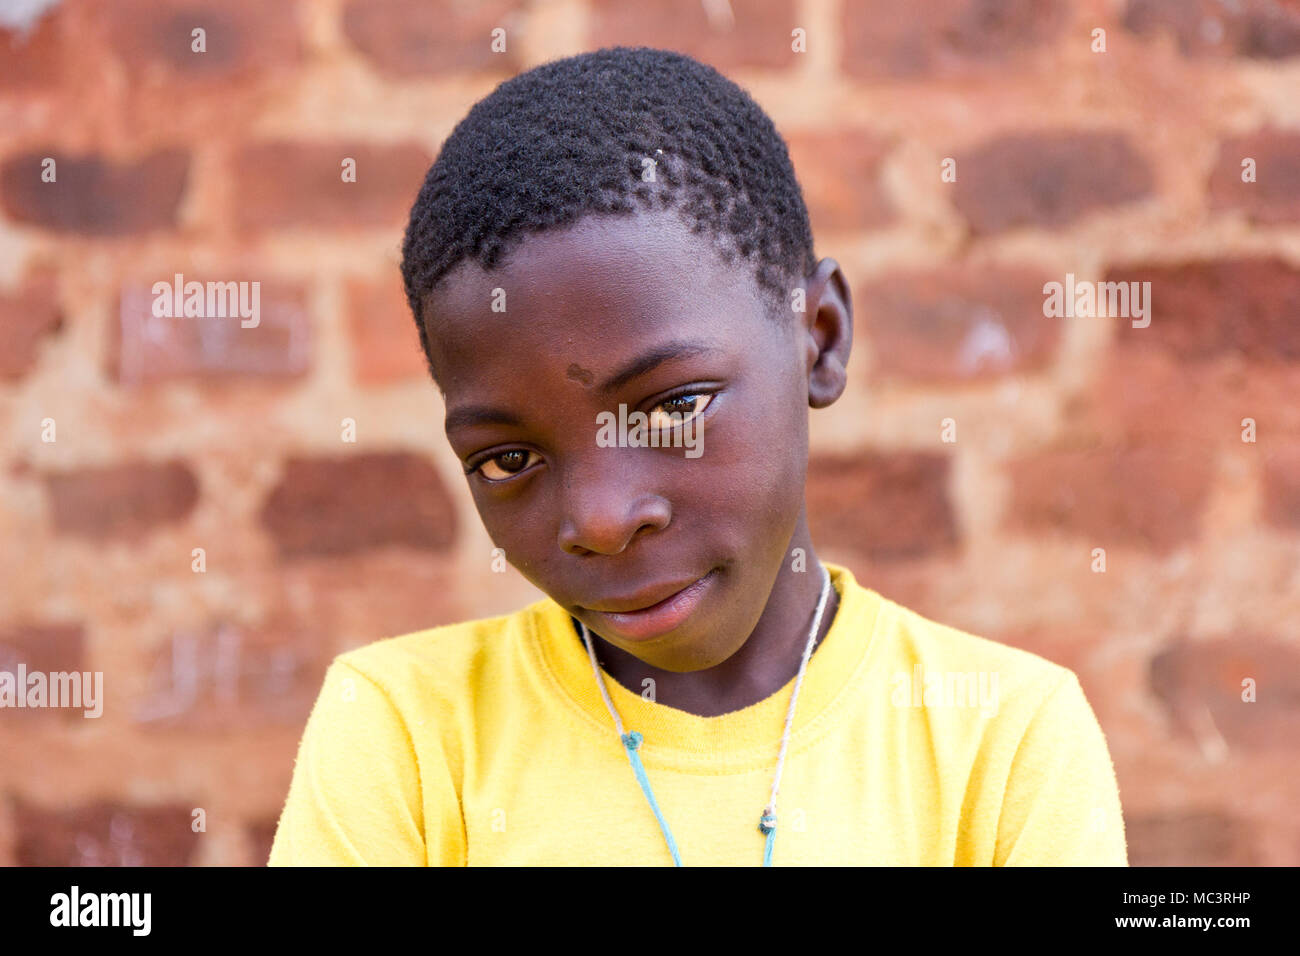 Uganda. June 13 2017. A Ugandan boy with arms crossed in the Primary school. Stock Photo